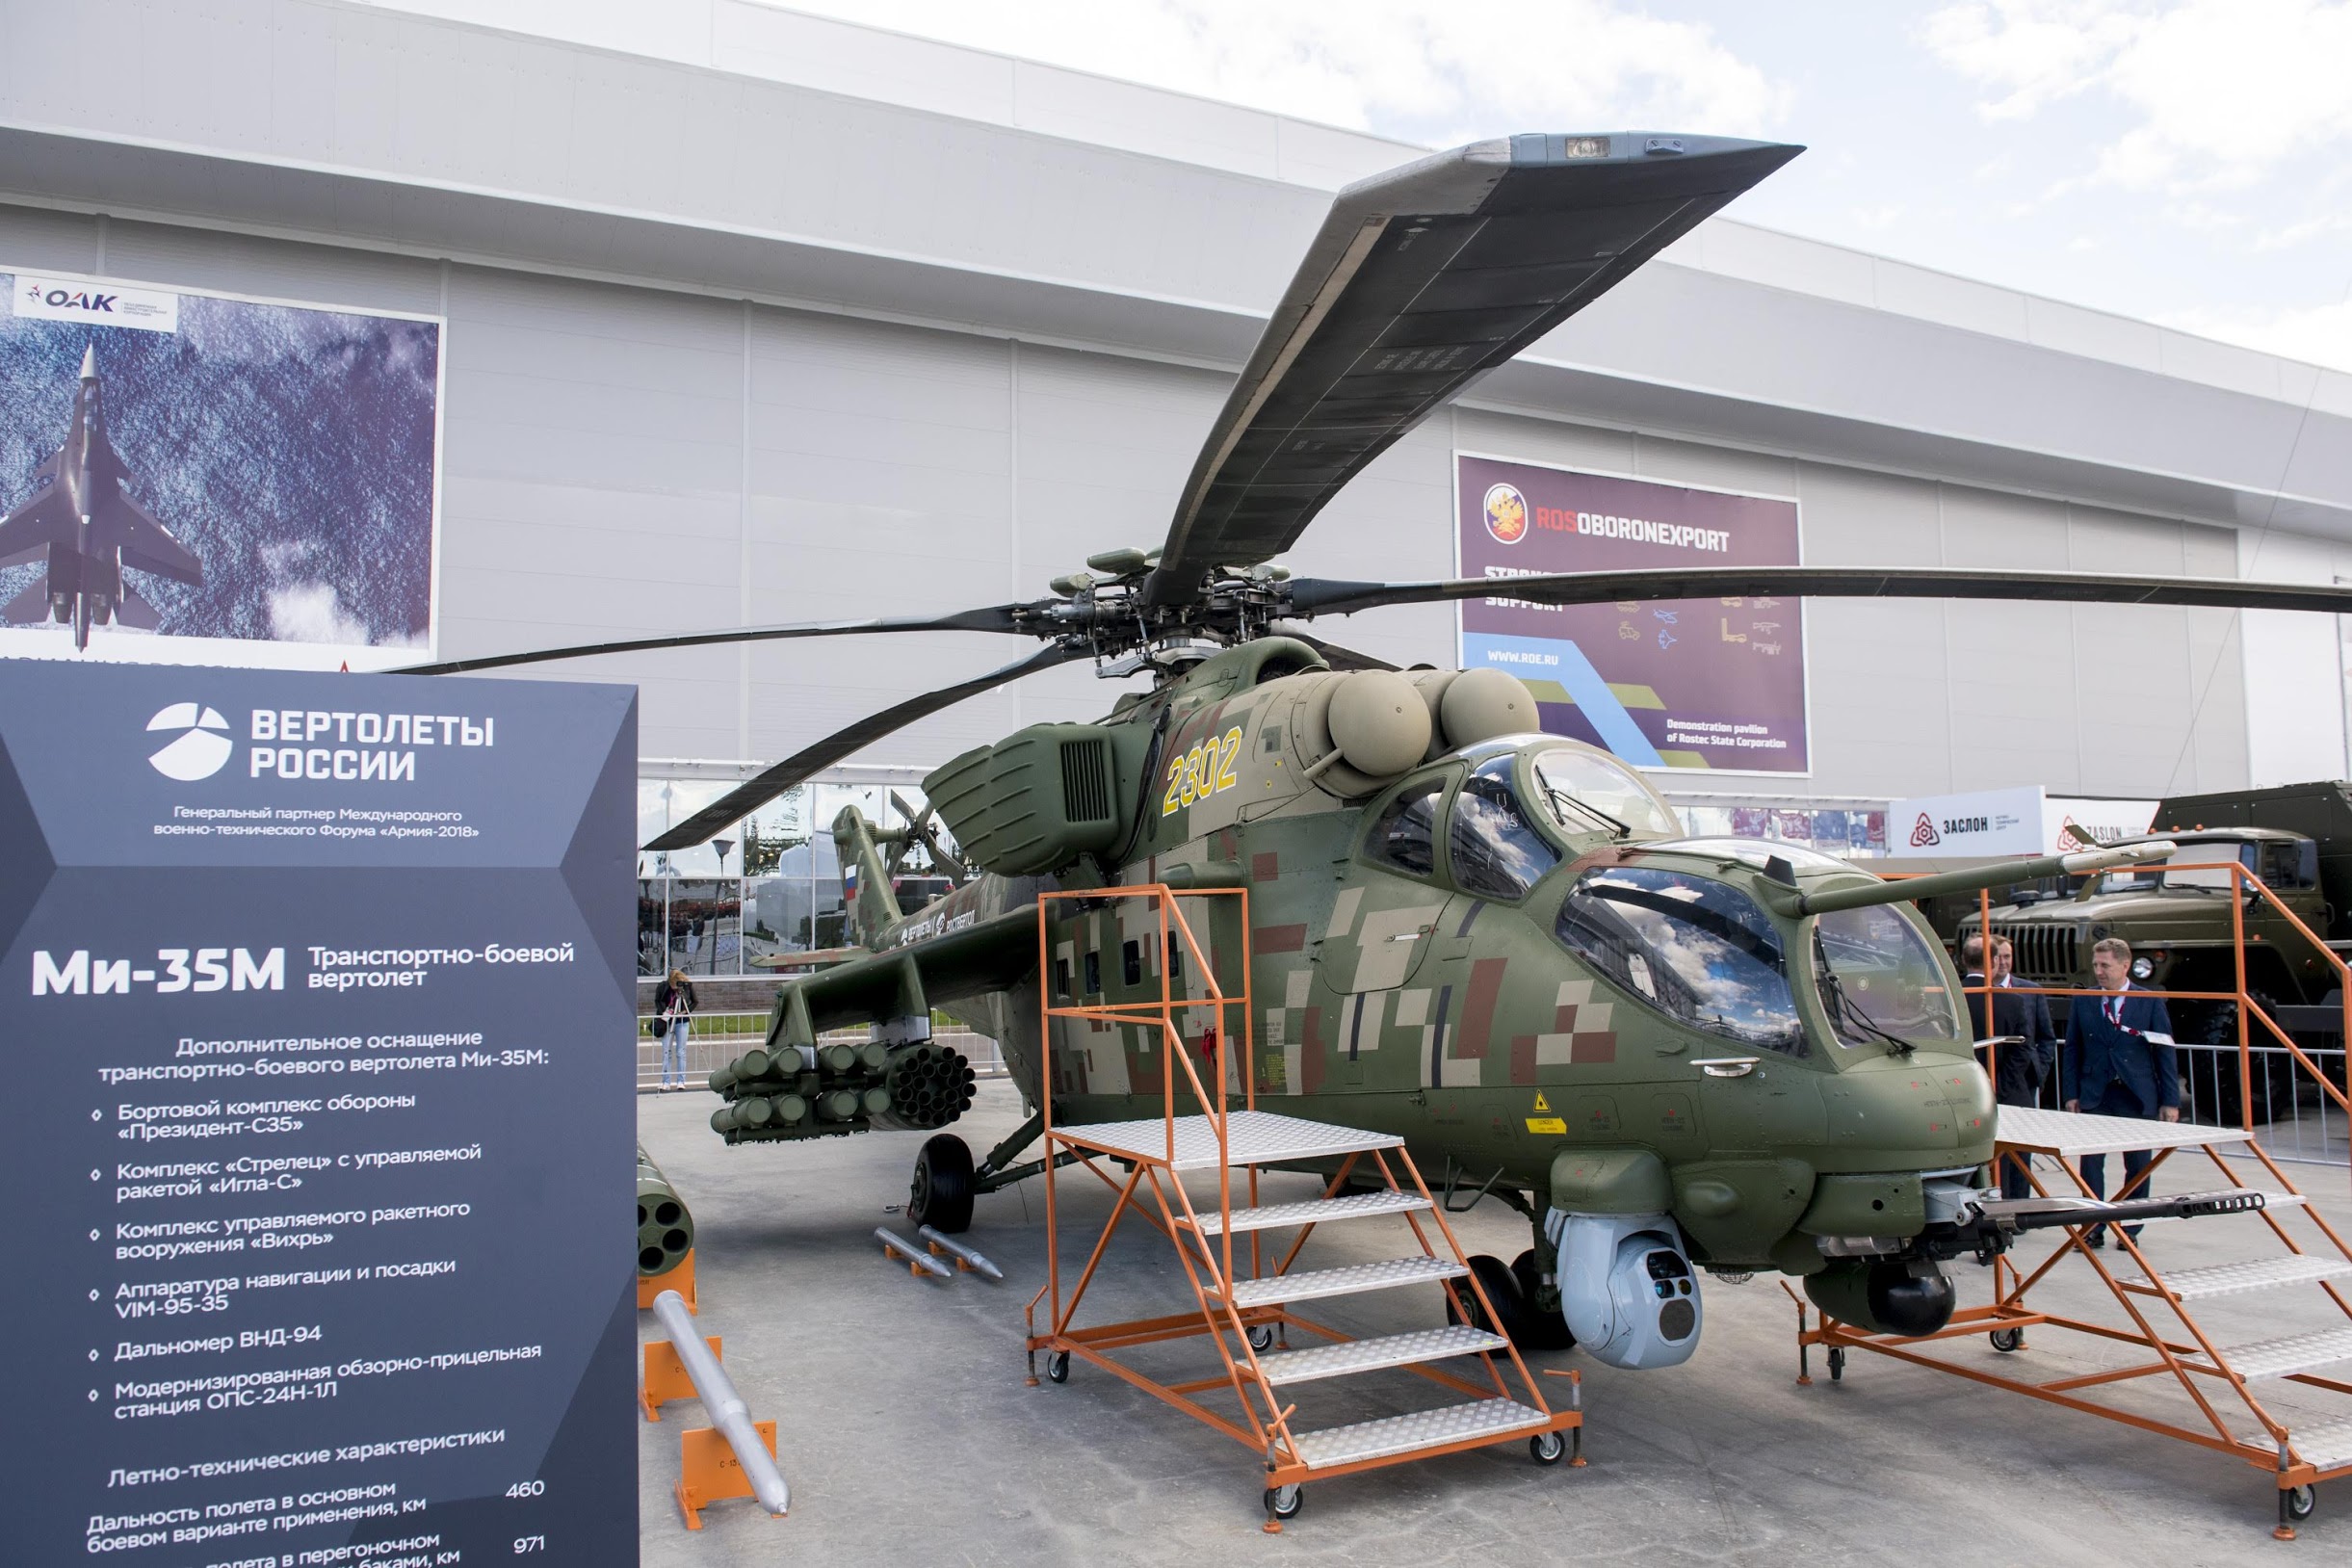 "Russian Helicopters" to Present a Wide Range of Military Rotorcraft at the "Army-2021" Forum